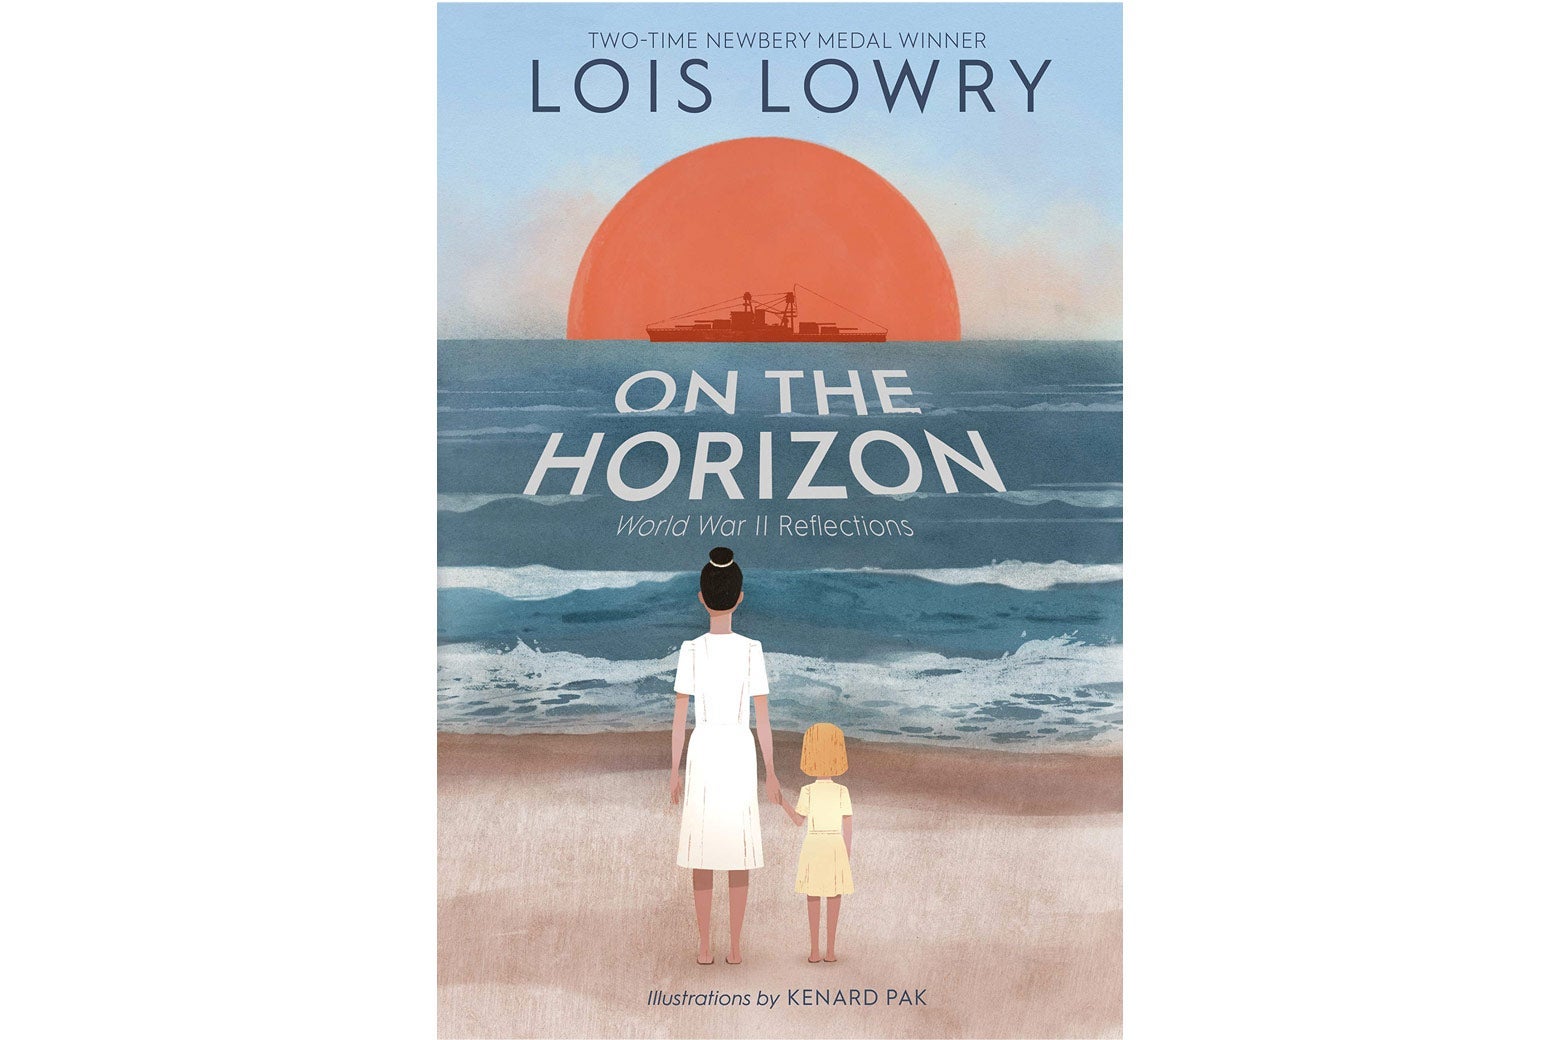 On the Horizon book cover.